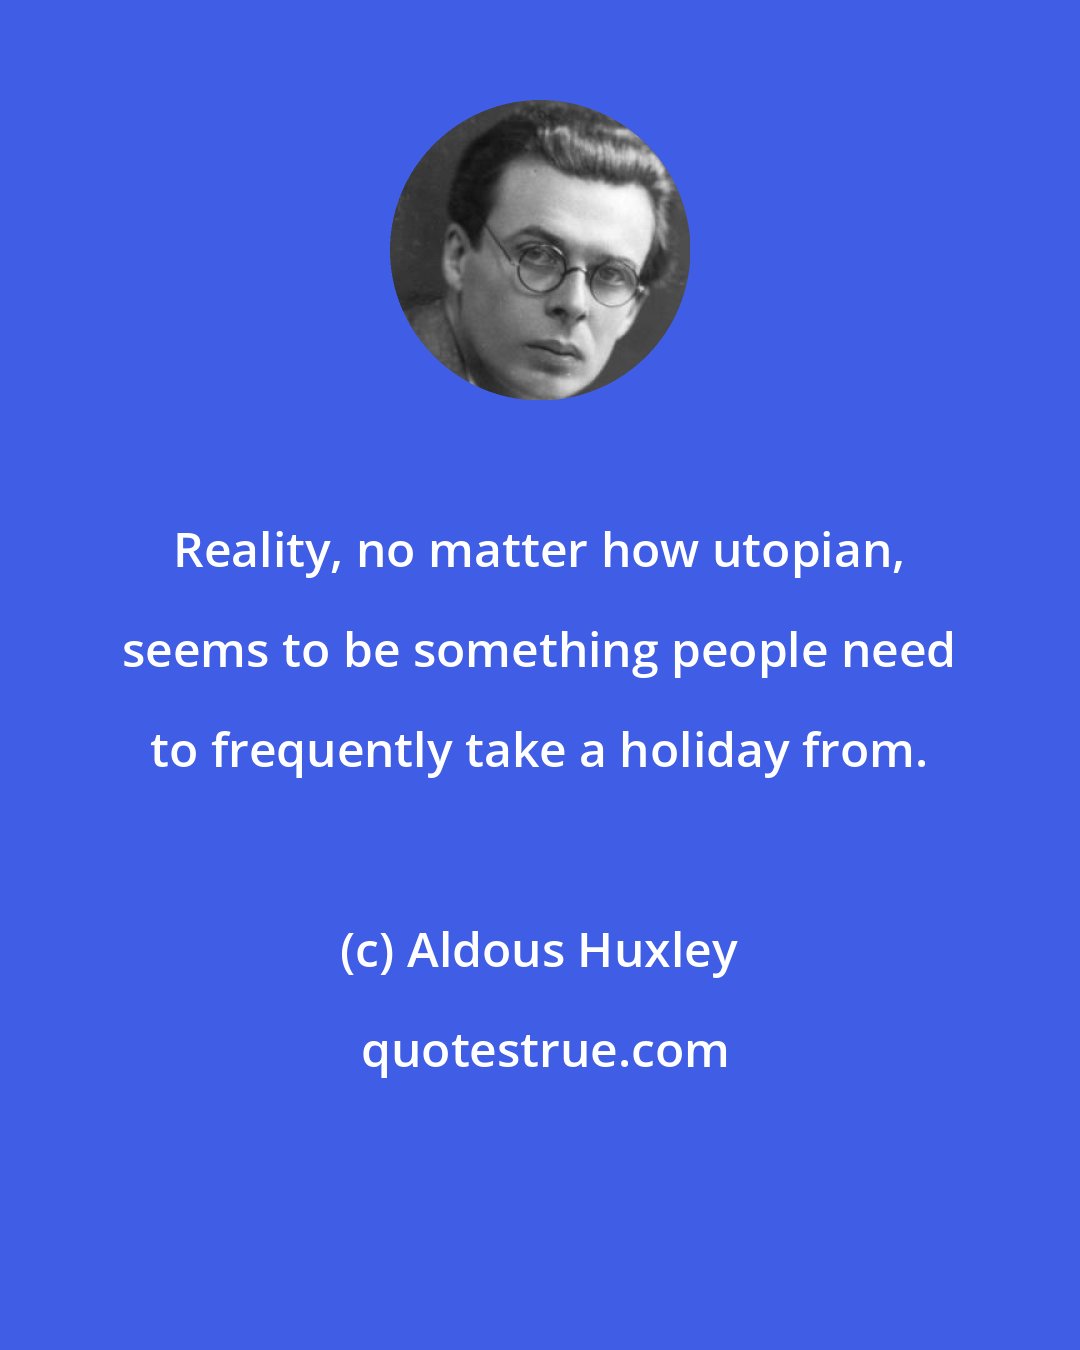 Aldous Huxley: Reality, no matter how utopian, seems to be something people need to frequently take a holiday from.